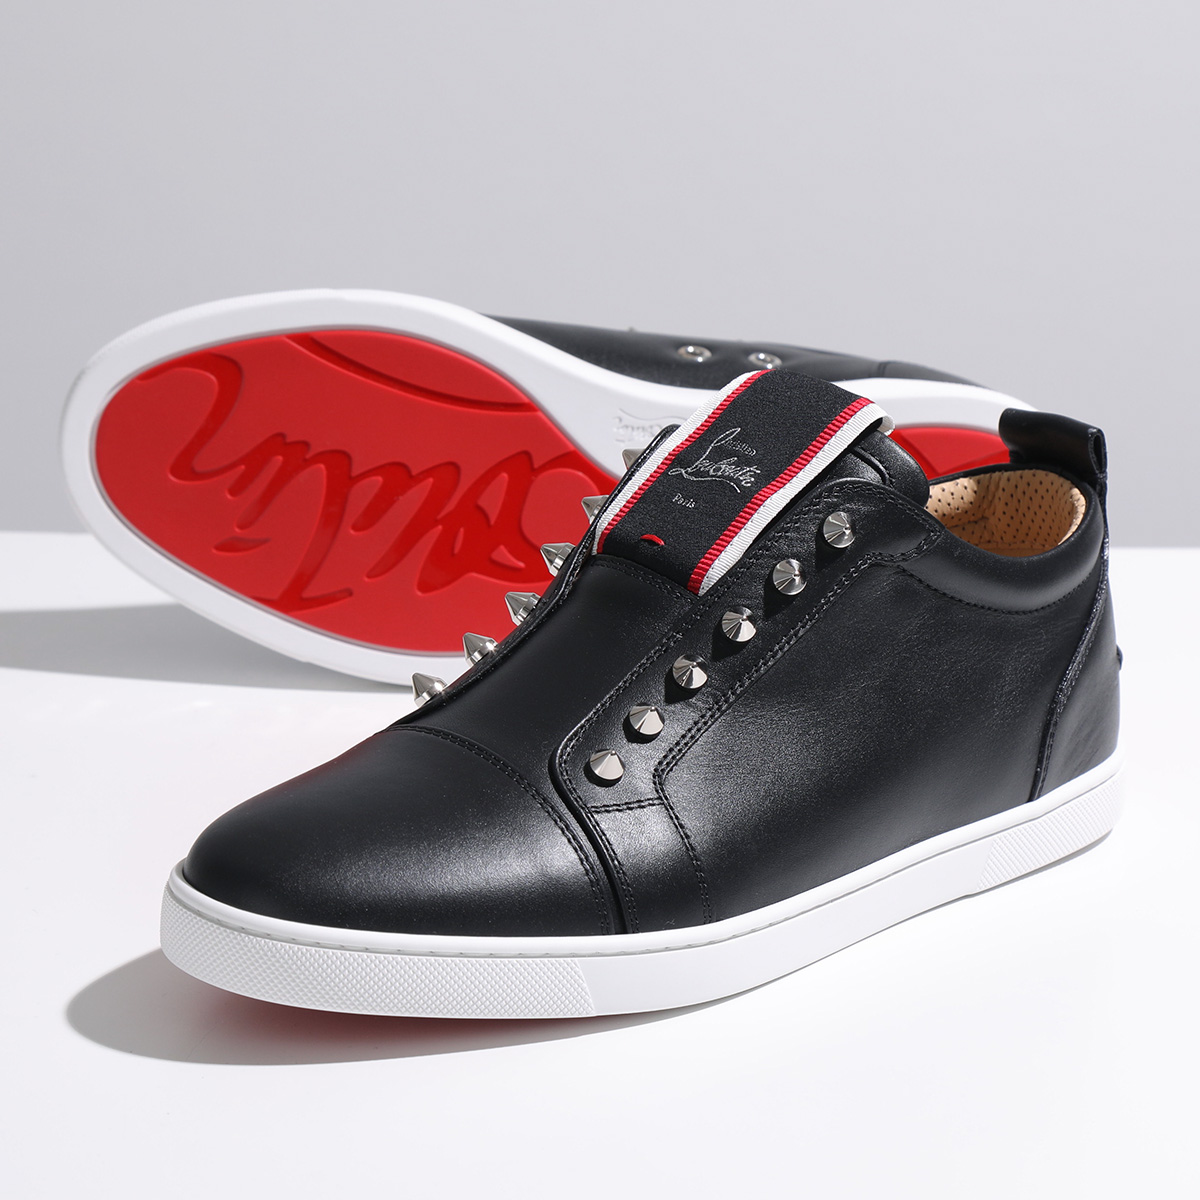 Christian Louboutin クリスチャンルブタン スニーカー F.A.V Fique A Vontade 3200465 メンズ レザー スタッズ装飾 スリッポンロゴ 靴 カラー2色｜s-musee｜03